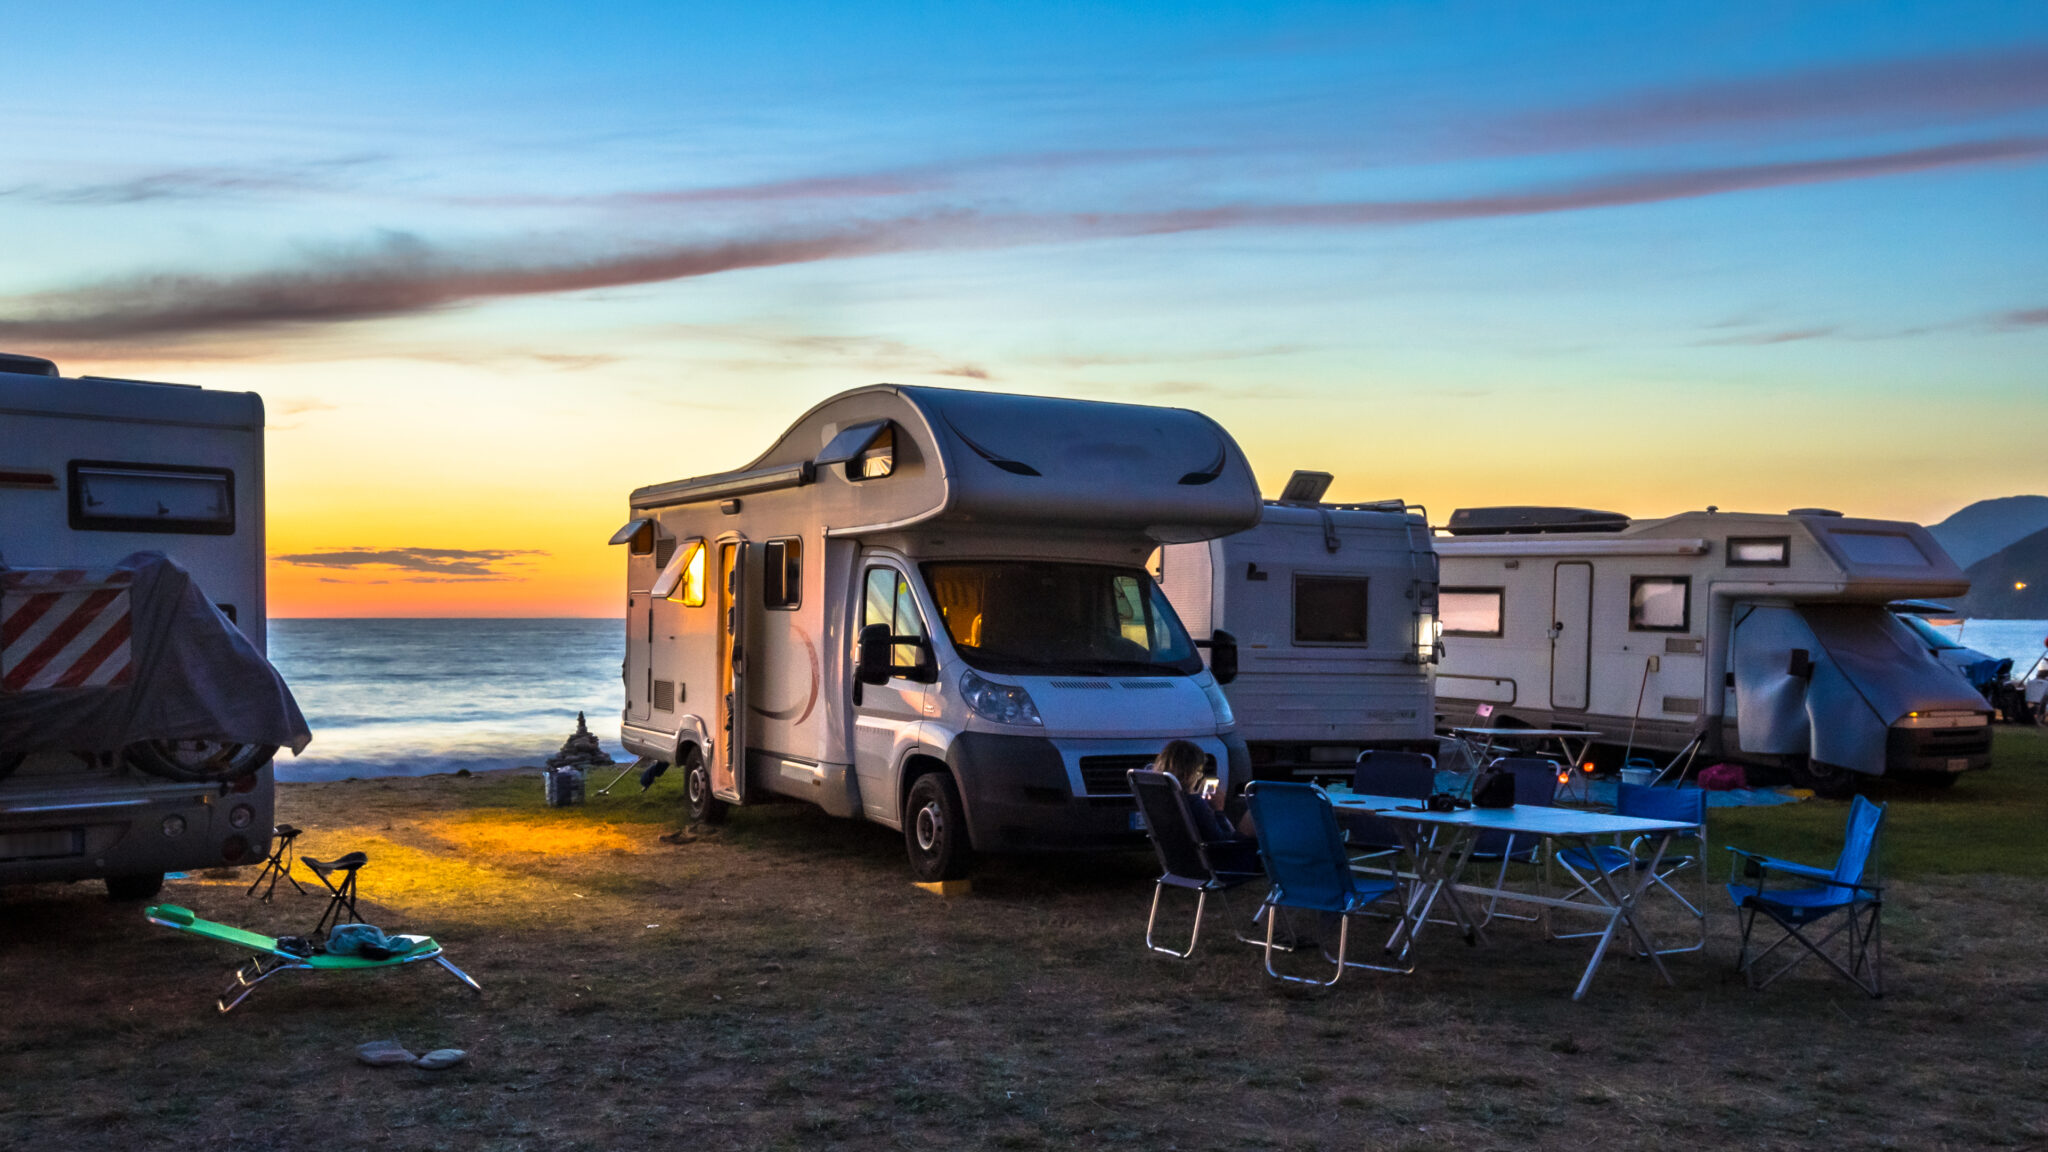 camper vans on the beach with a seaview, perfect for divers